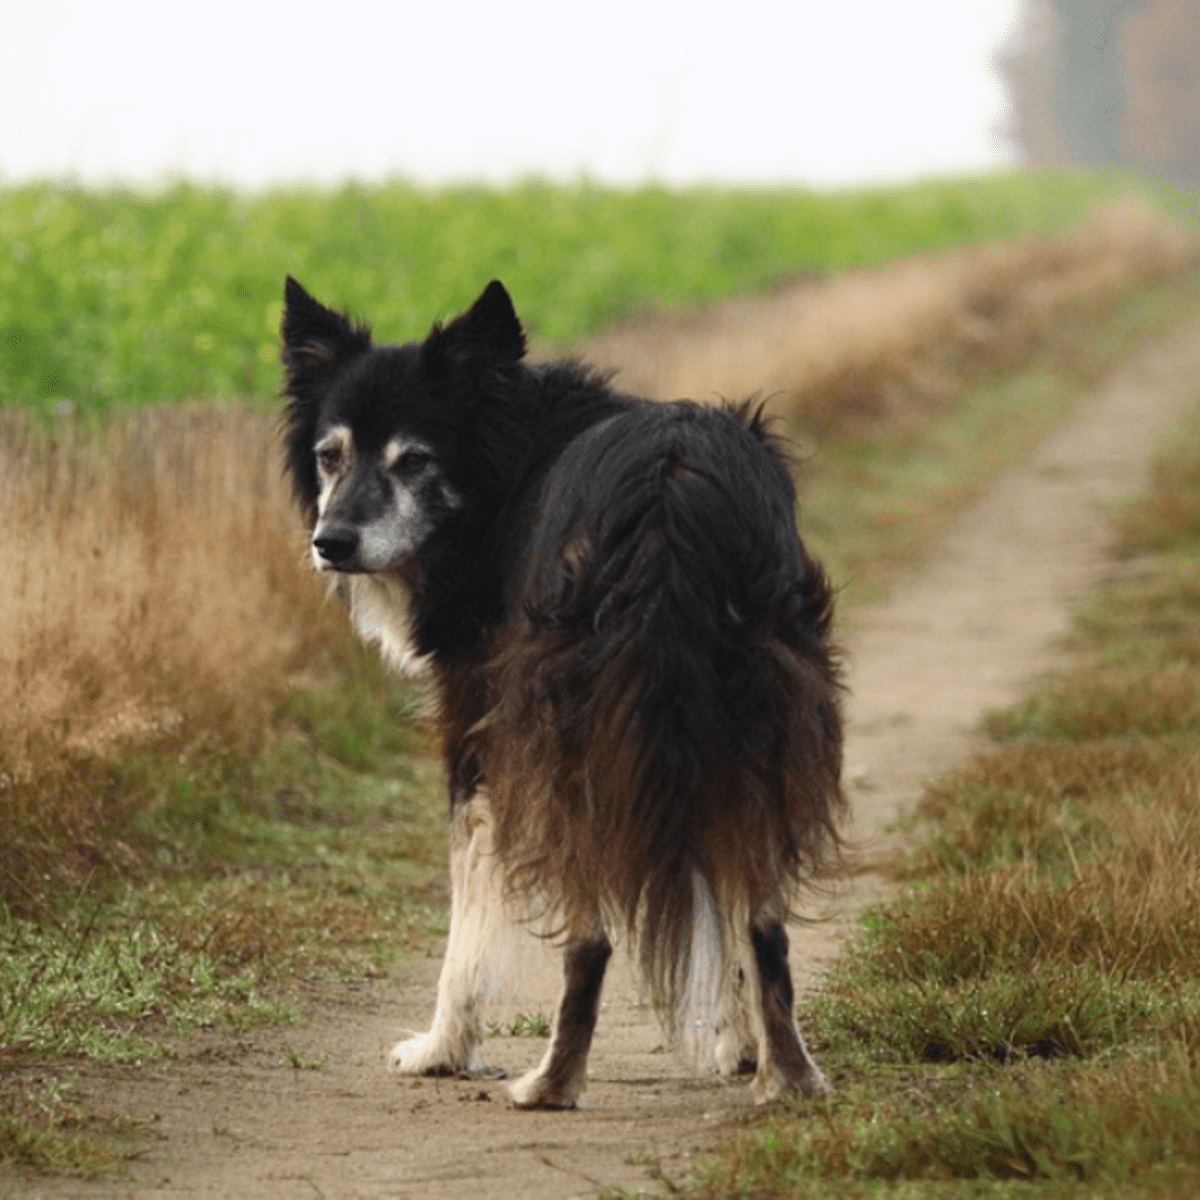 7 Causes of Sudden Hind Leg Weakness in Dogs